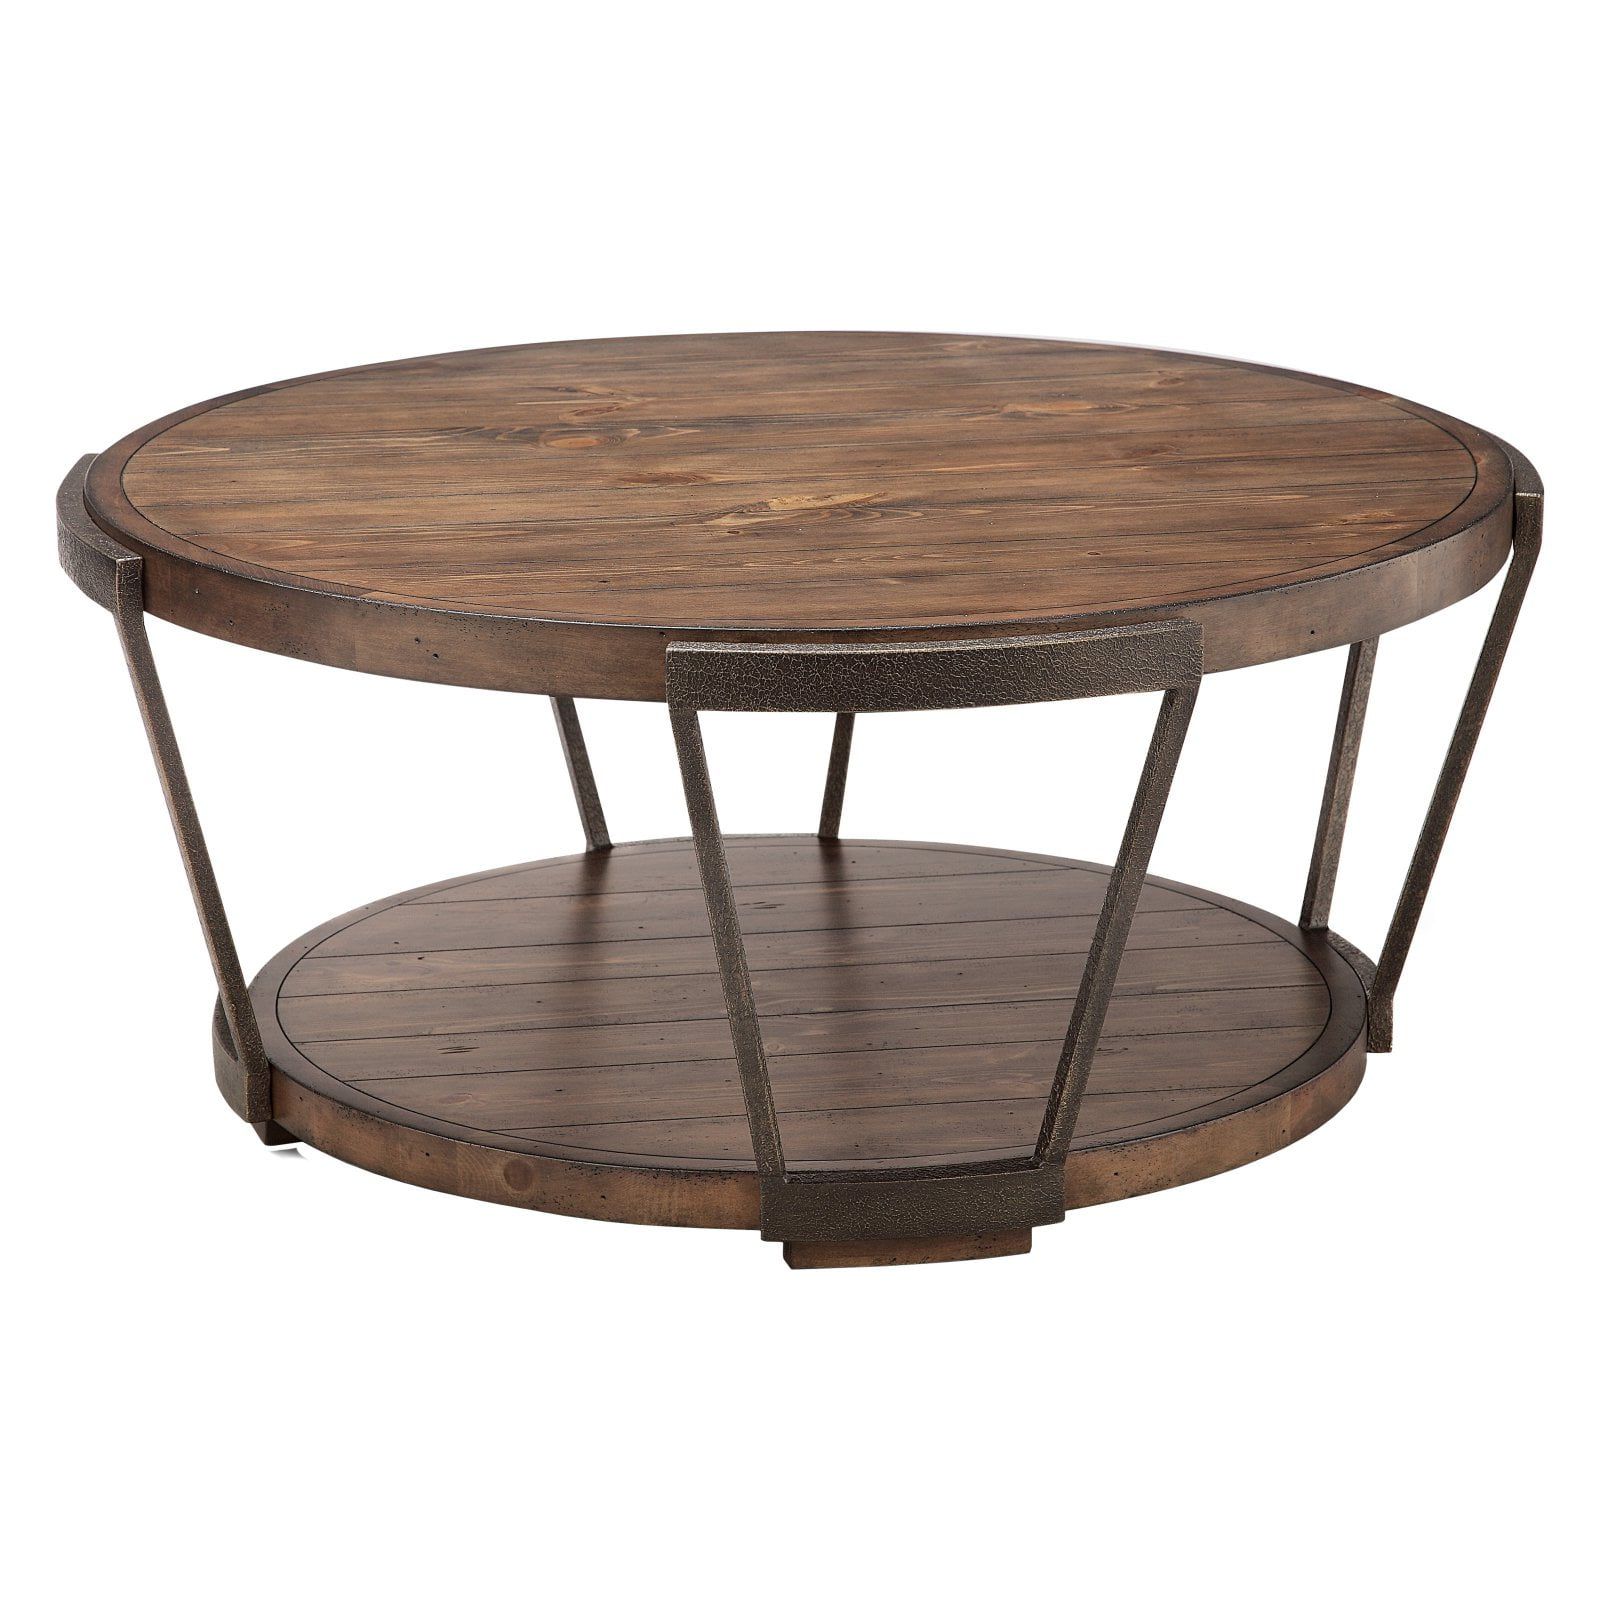 Magnussen Yukon Industrial Round Coffee Table With Casters – Walmart Pertaining To Coffee Tables With Casters (Gallery 15 of 20)